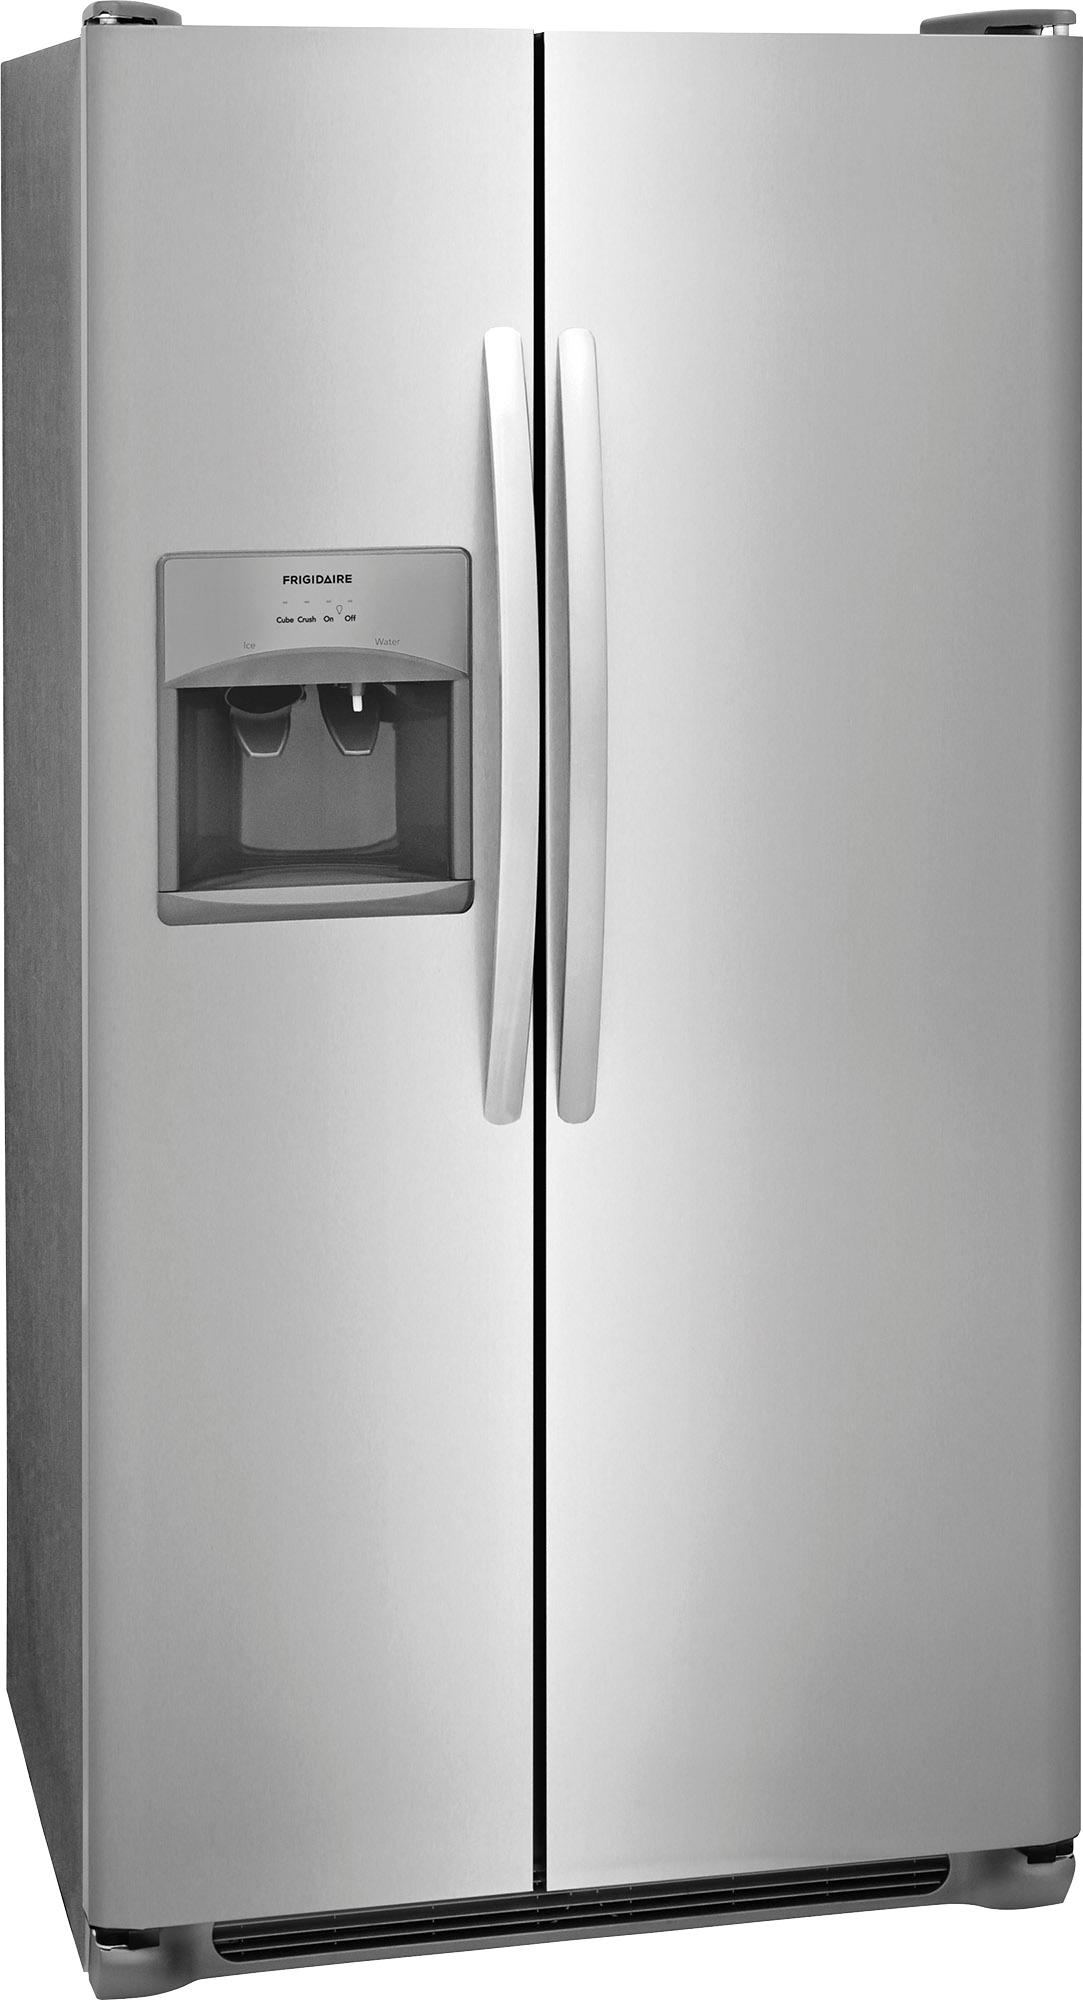 Angle View: Frigidaire - 25.6 Cu. Ft. Side-by-Side Refrigerator - Stainless steel